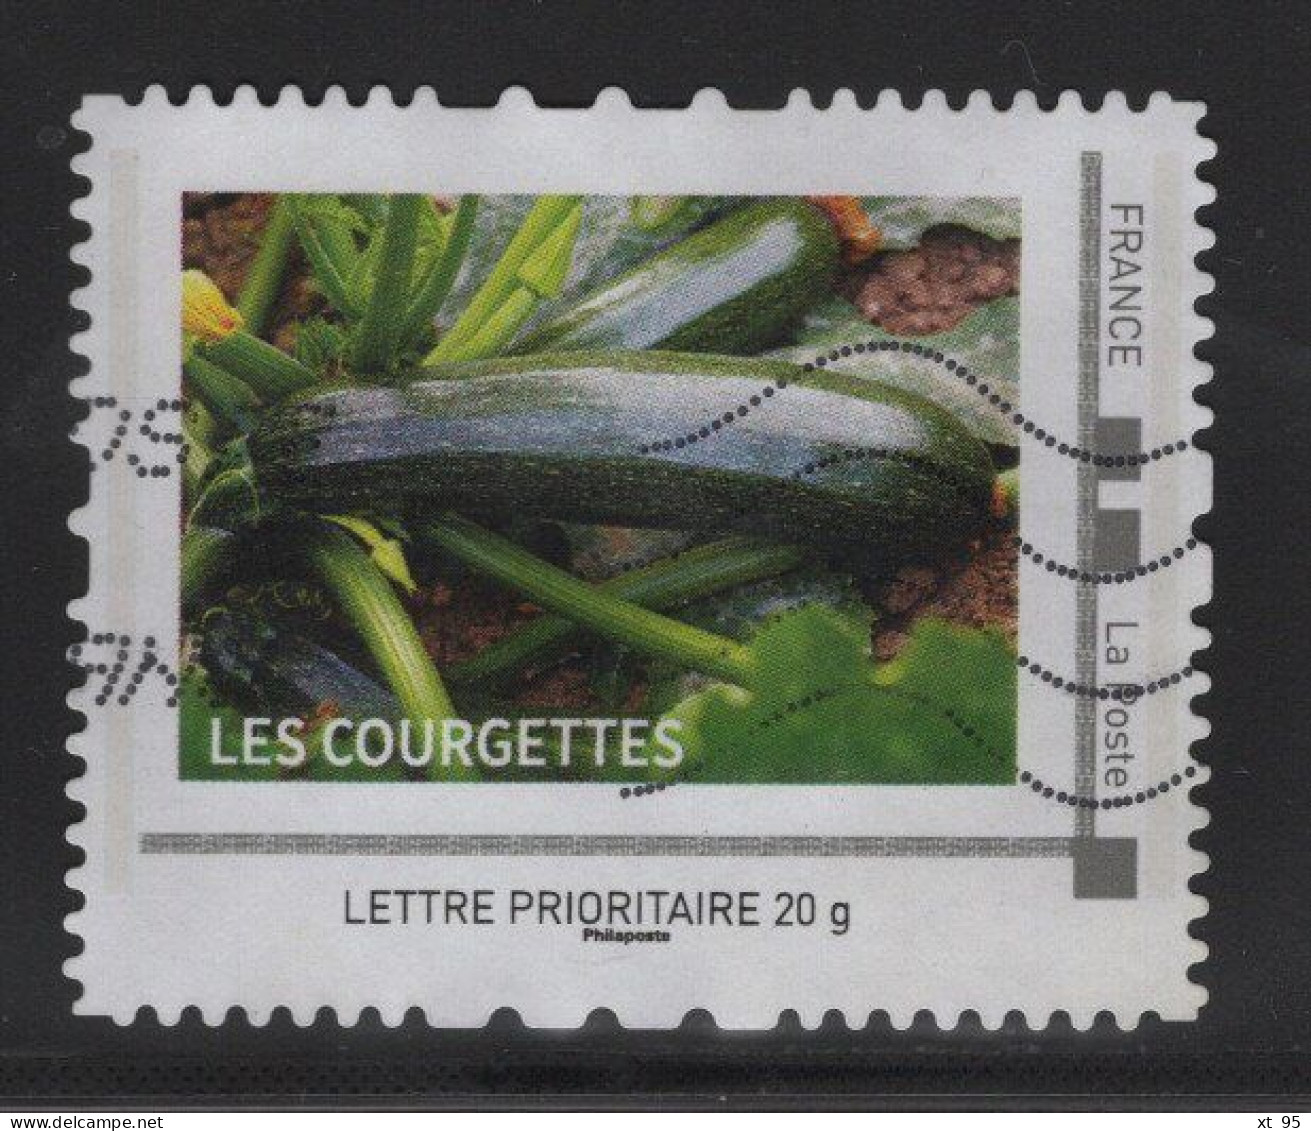 Timbre Personnalise Oblitere - Lettre Prioritaire 20g - Les Courgettes - Usados